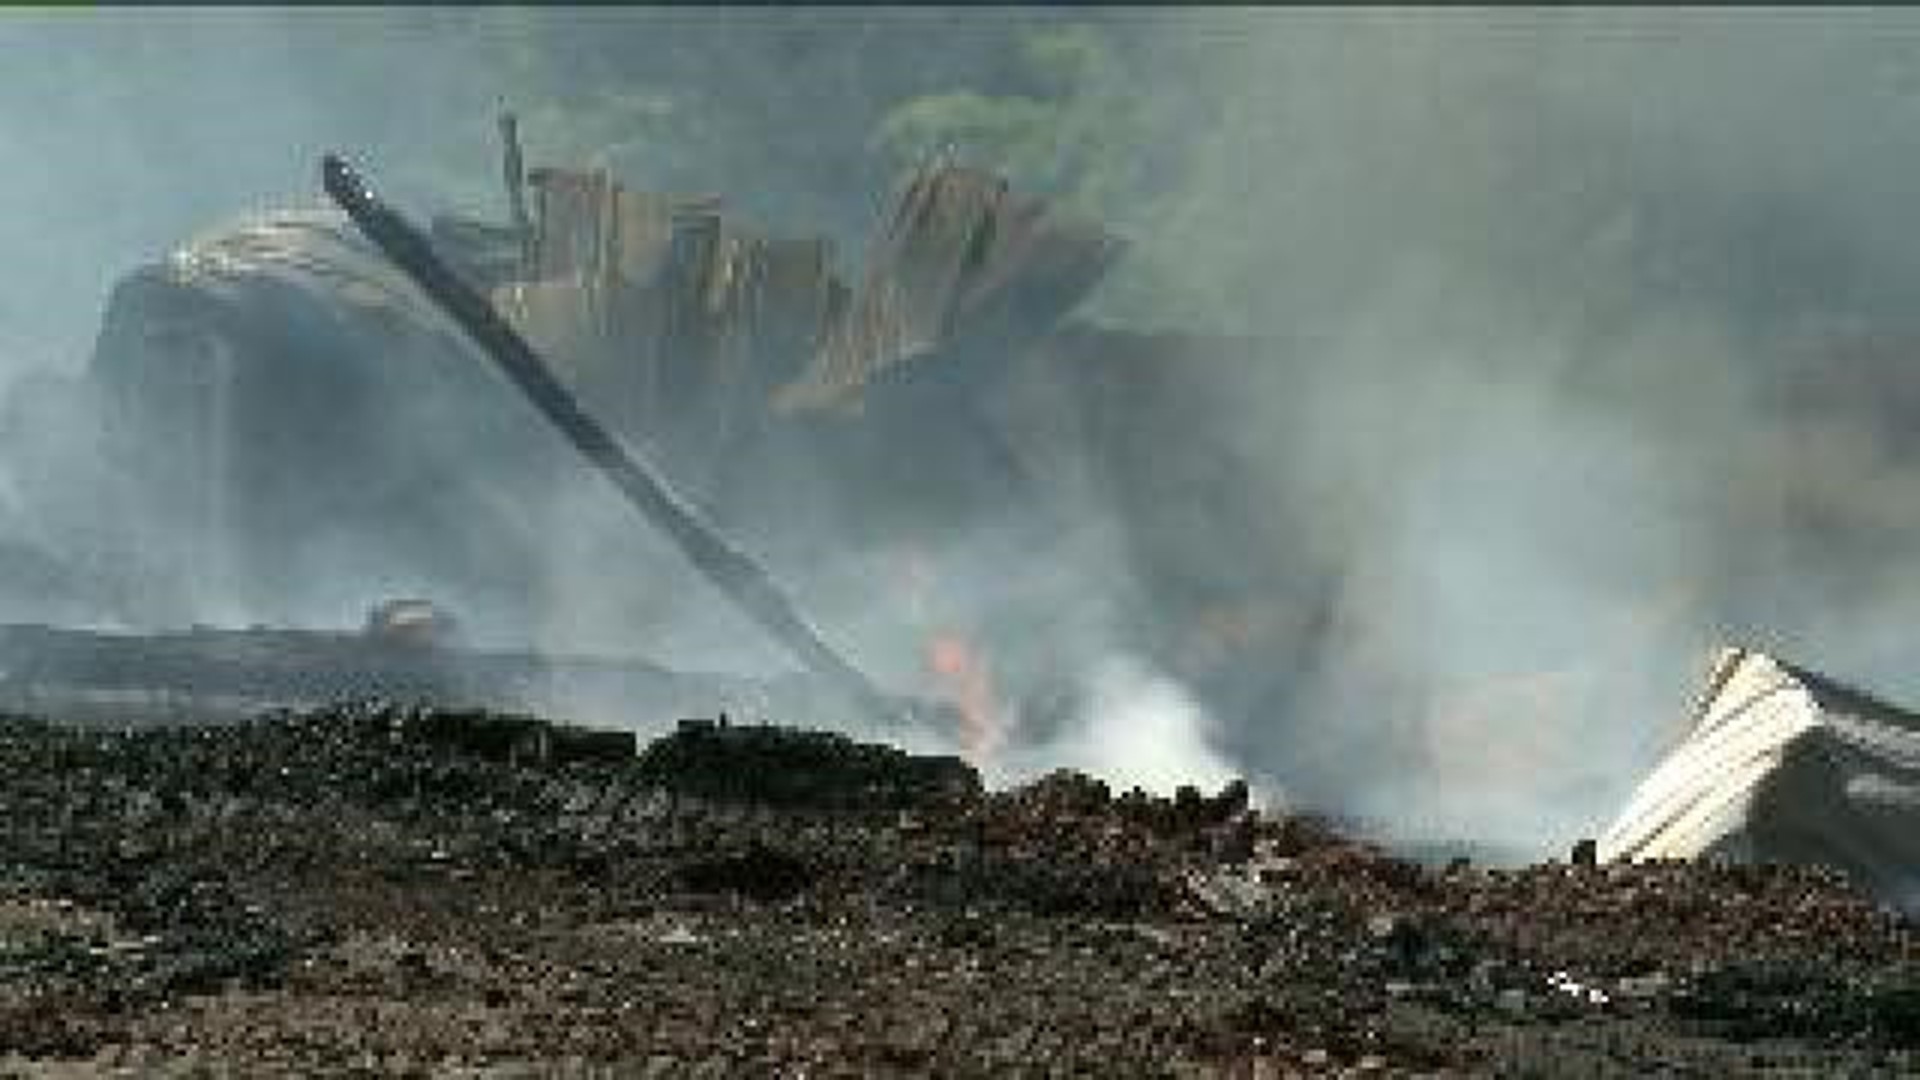 UPDATE: Cows Killed, Barn Leveled By Fire in Wayne County